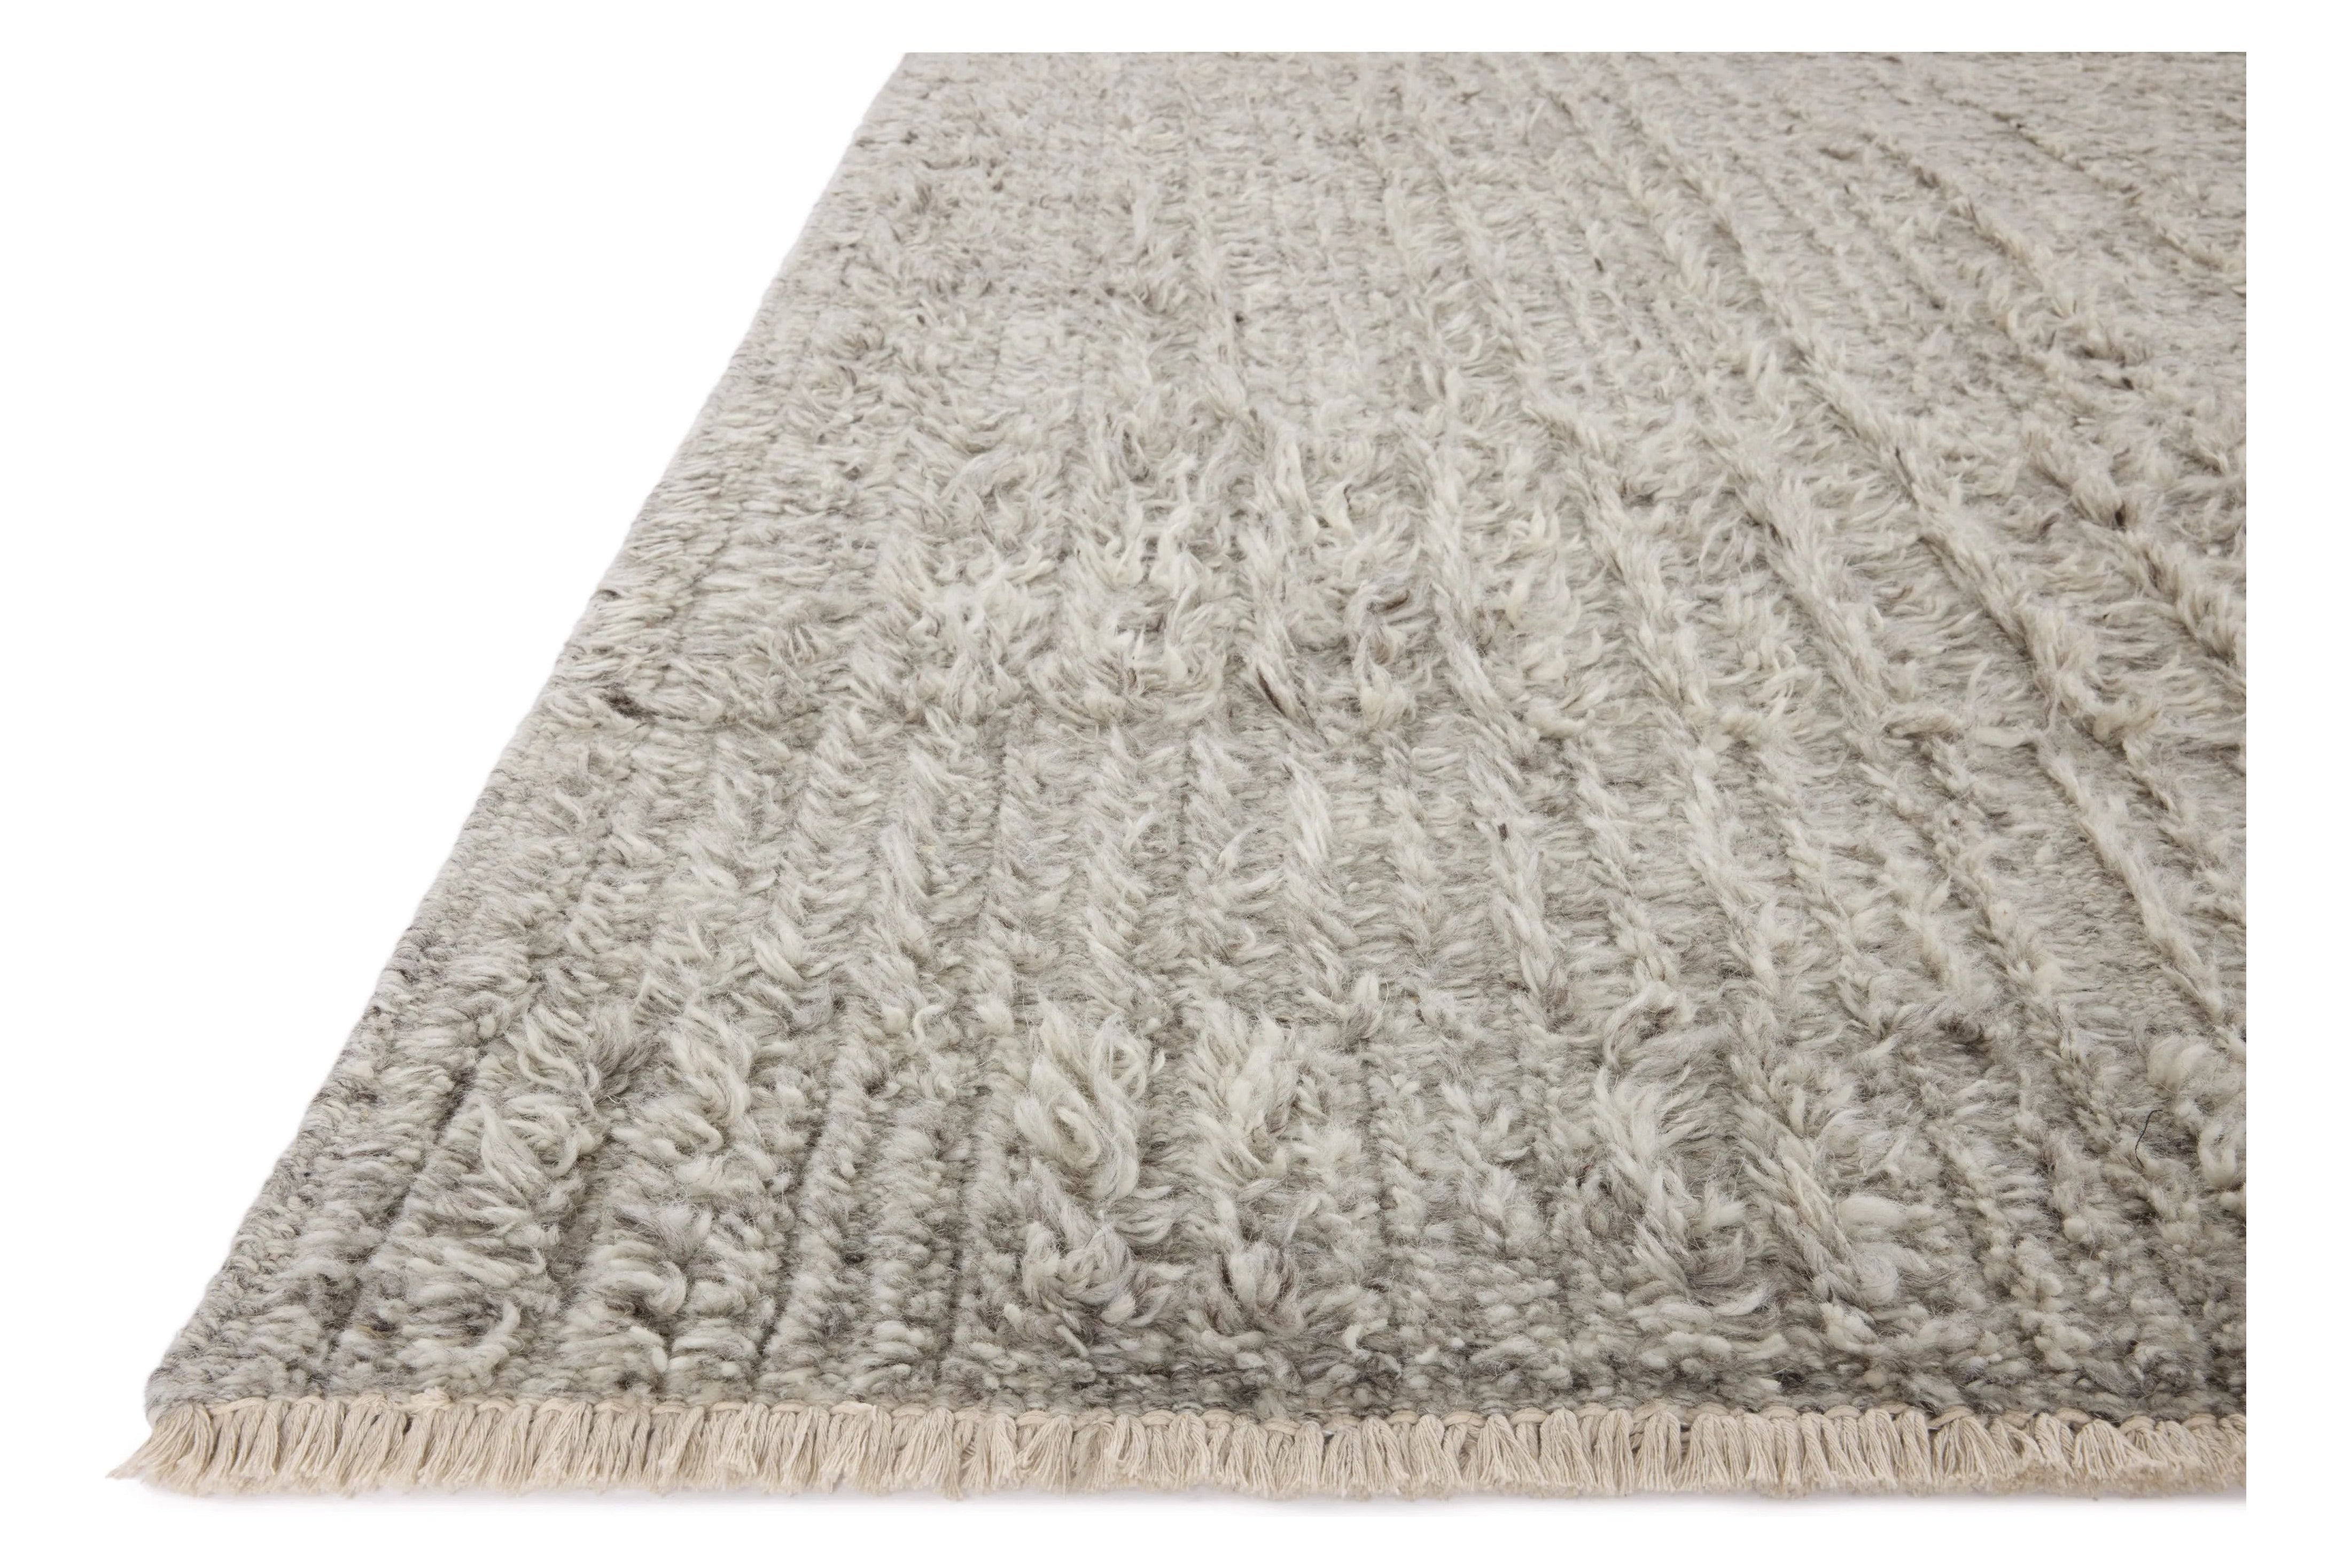 Irresistible to walk upon, the Dana Grey Rug by Brigette Romanek x Loloi has a high-low texture that alternates between a subtly shaggy pile and a soft base. Horizontal broken stripes give the area rug a fresh and energized structure, while a finish of fringe along the edges accentuates its sense of movement. Amethyst Home provides interior design, new home construction design consulting, vintage area rugs, and lighting in the Washington metro area.